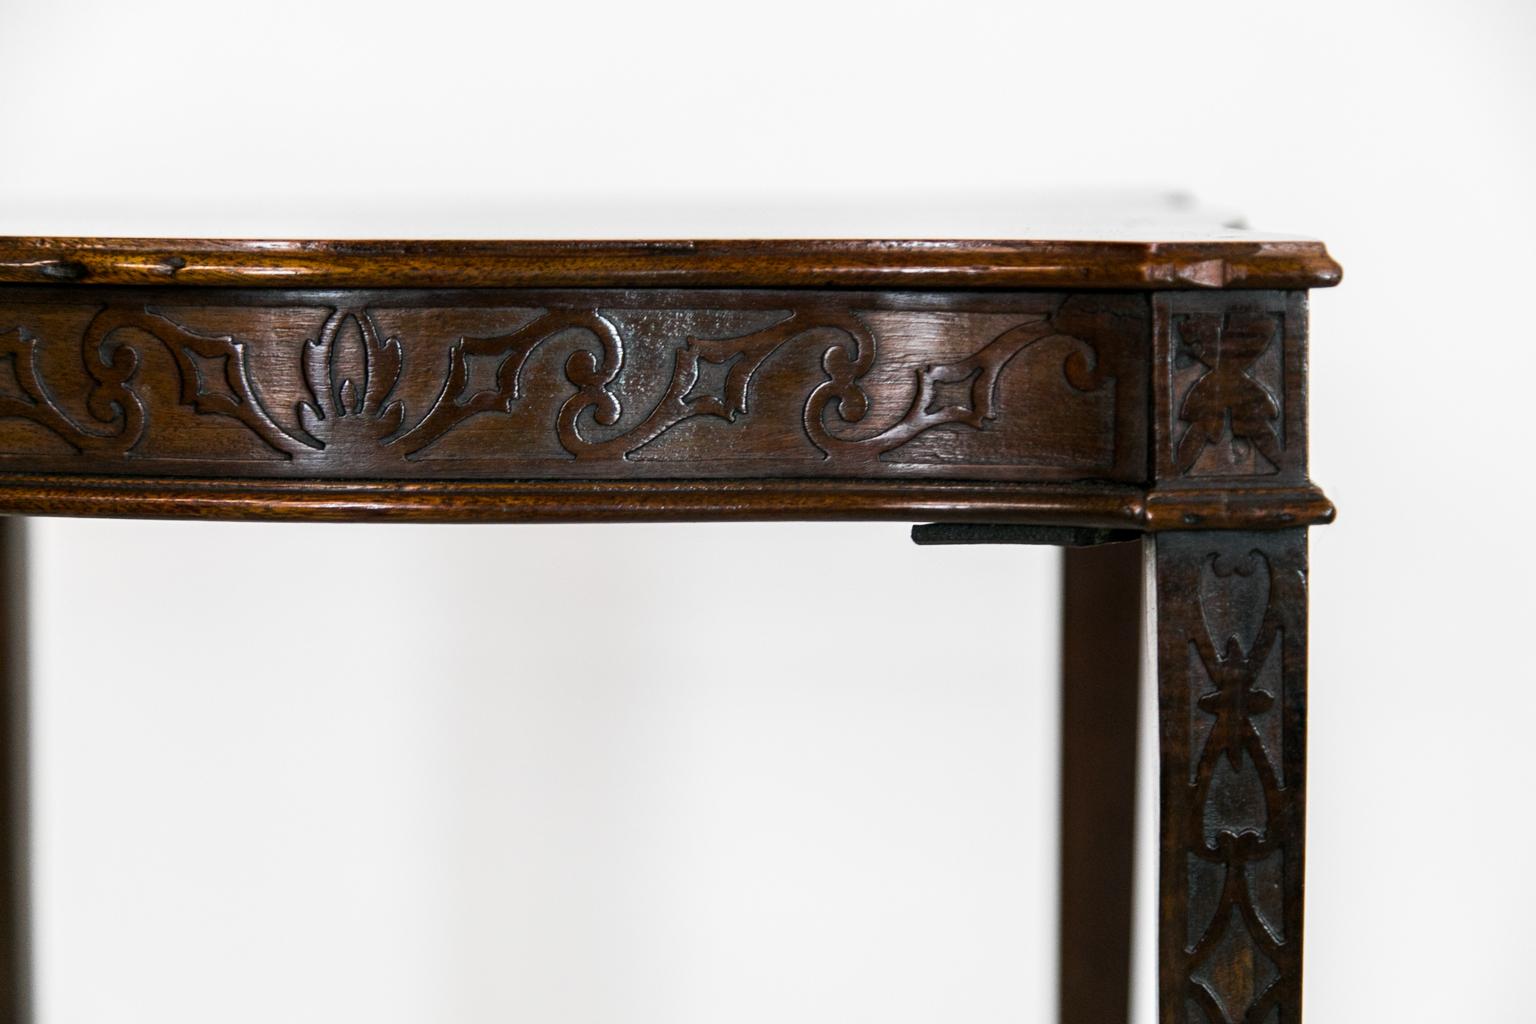 This serpentine table has a blind fretwork apron and legs with an 